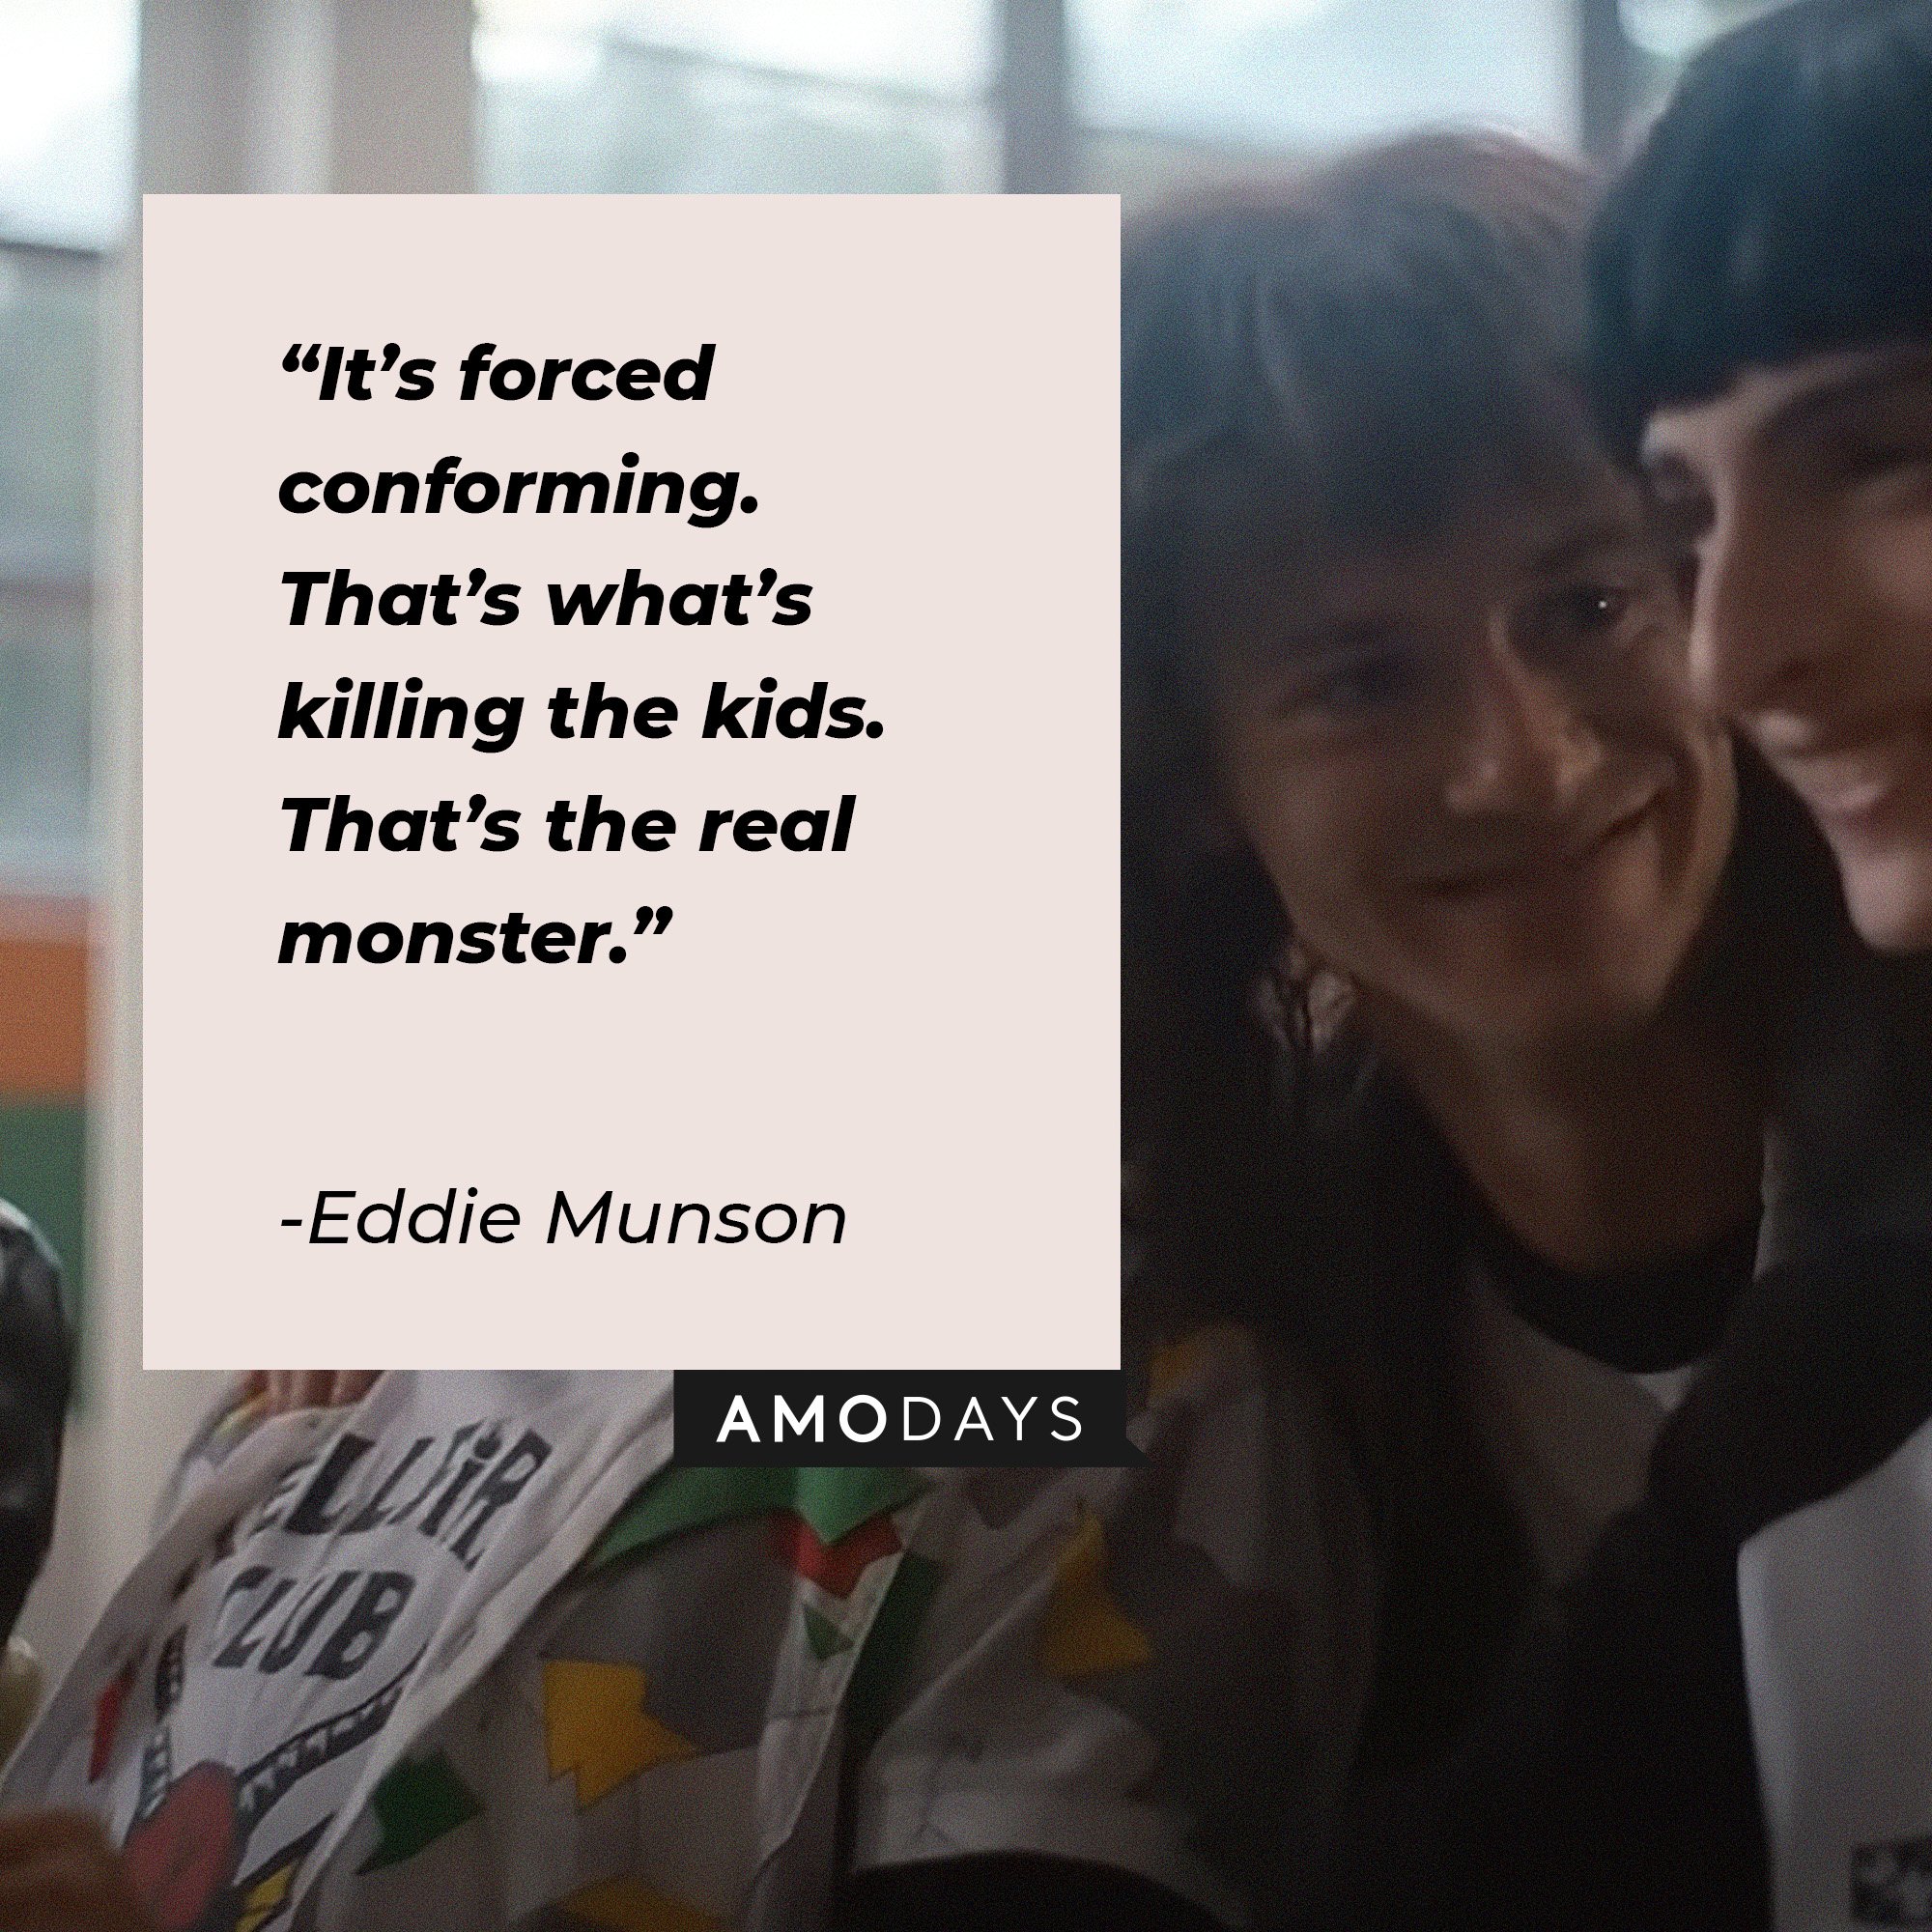 Eddie Munson’s quote: “It’s forced conforming. That’s what’s killing the kids. That’s the real monster.”  | Image: AmoDays